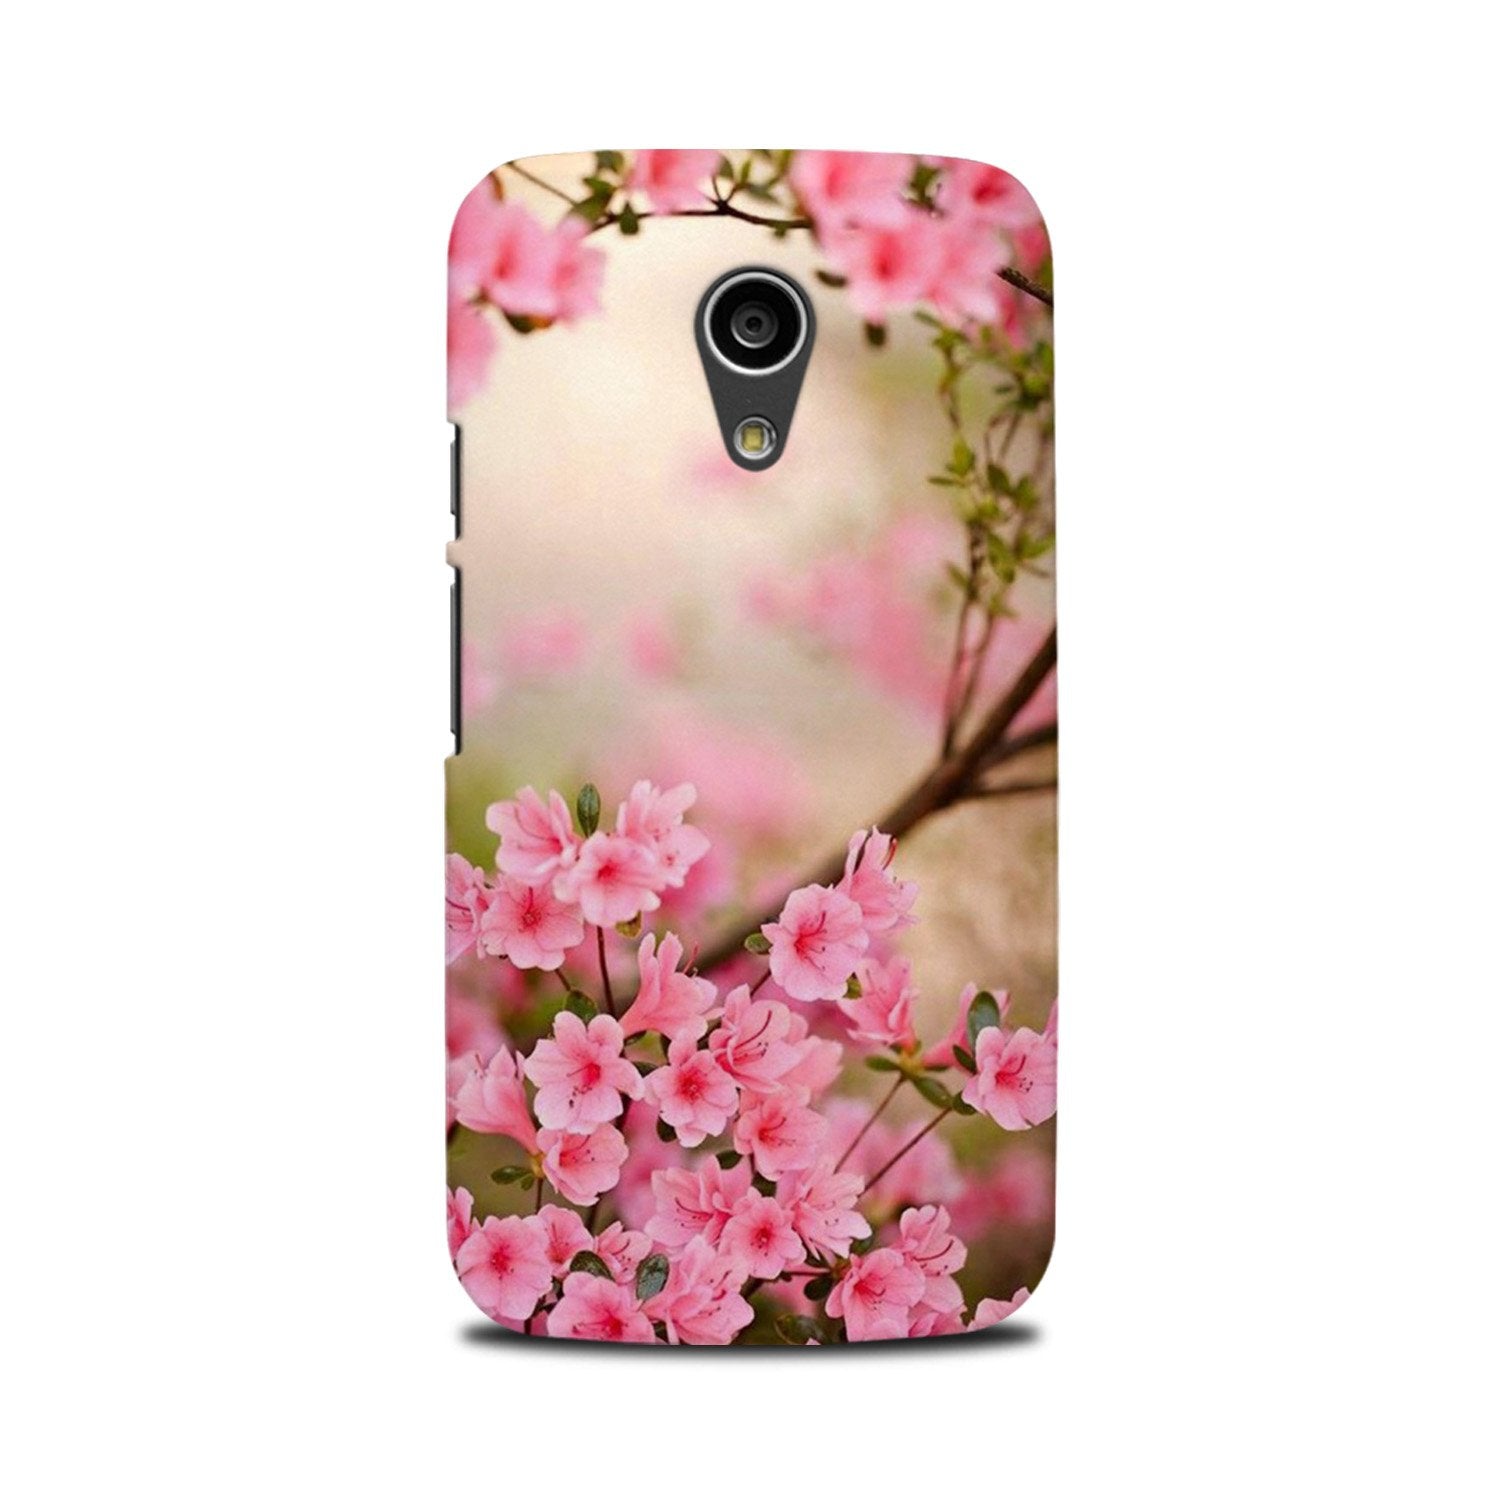 Pink flowers Case for Moto G2